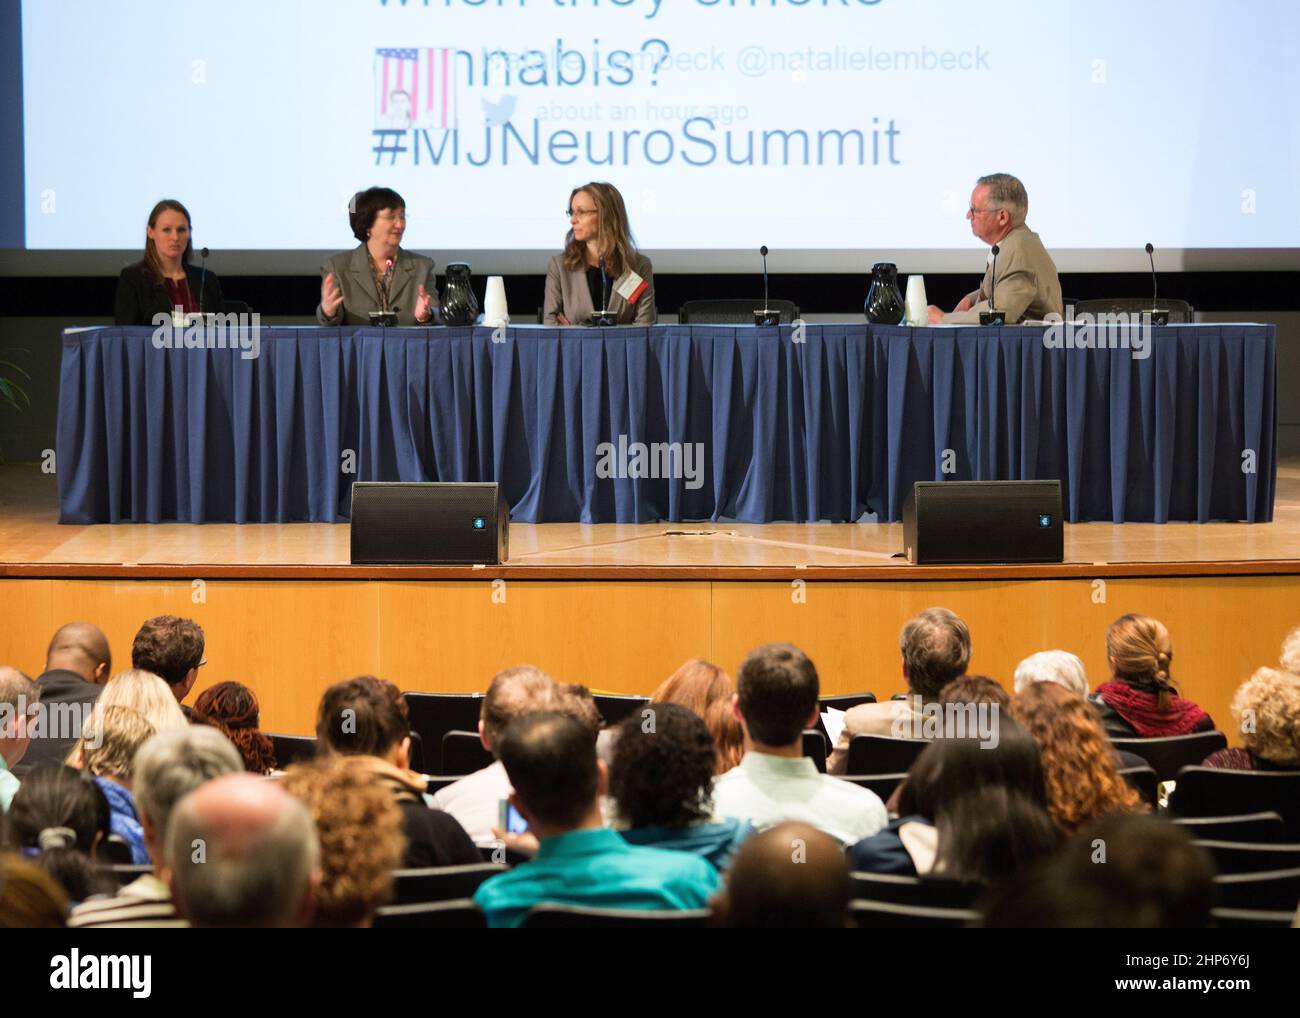 Panel on the therapeutic potential of cannabinoids and marijuana, from left to right:  Dr. Christina Rabinak from Wayne State University, Dr. Cecilia Hillard from Medical College of Wisconsin, Dr. Andrea G. Hohmann from Indiana University and Dr. Barth Wilsey from the Stock Photo